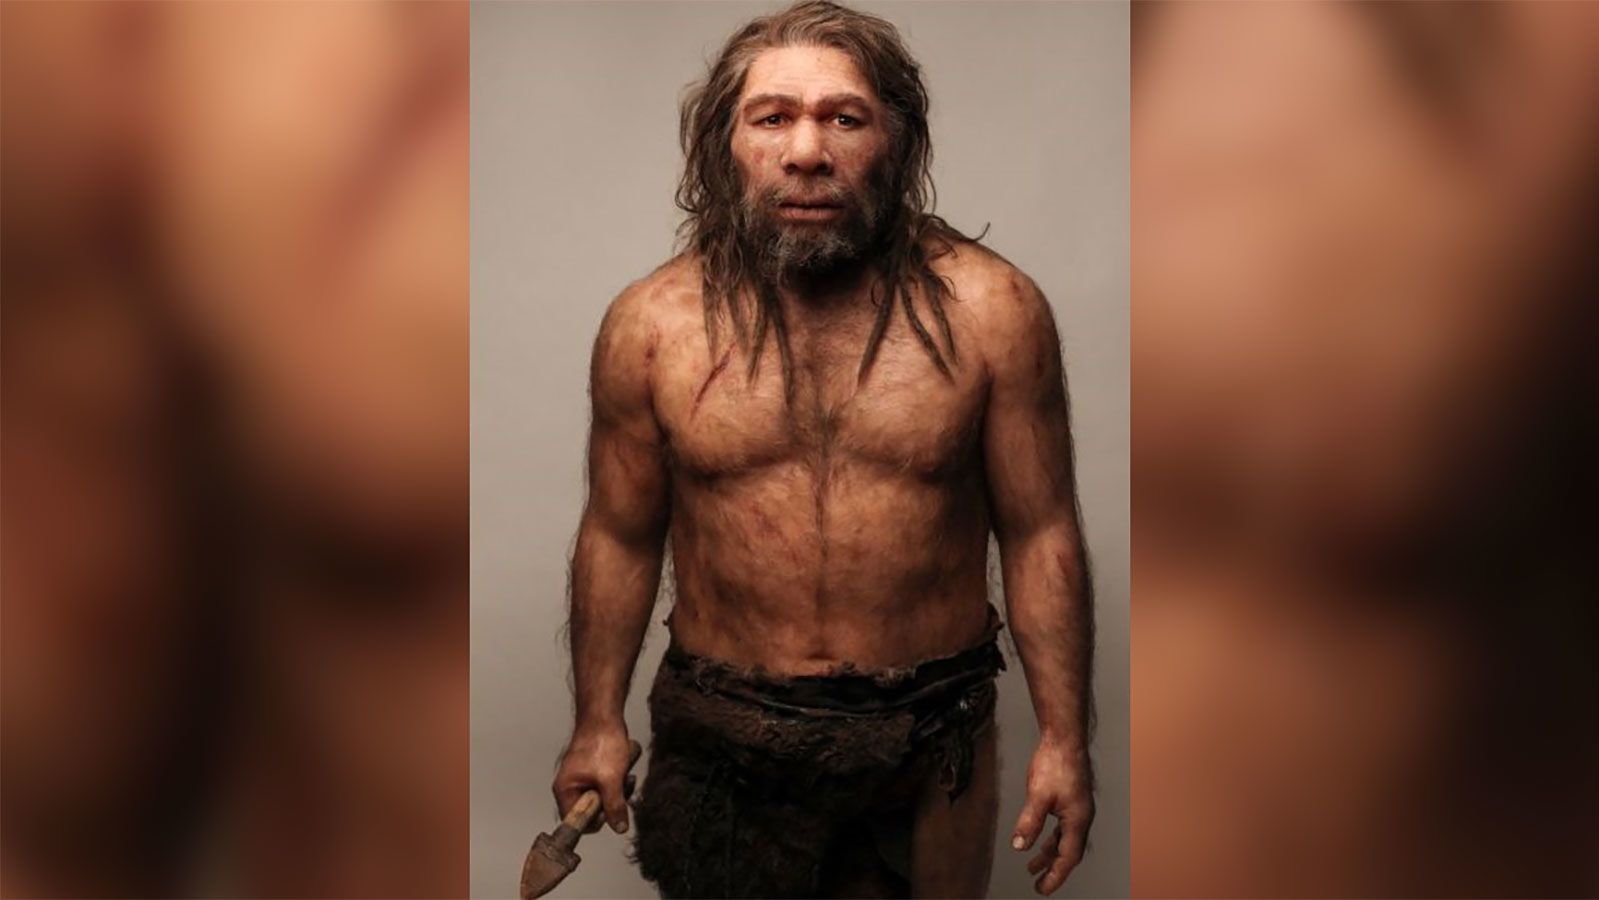 Neanderthals and early modern humans living in Europe and parts of Asia overlapped for several thousand years.